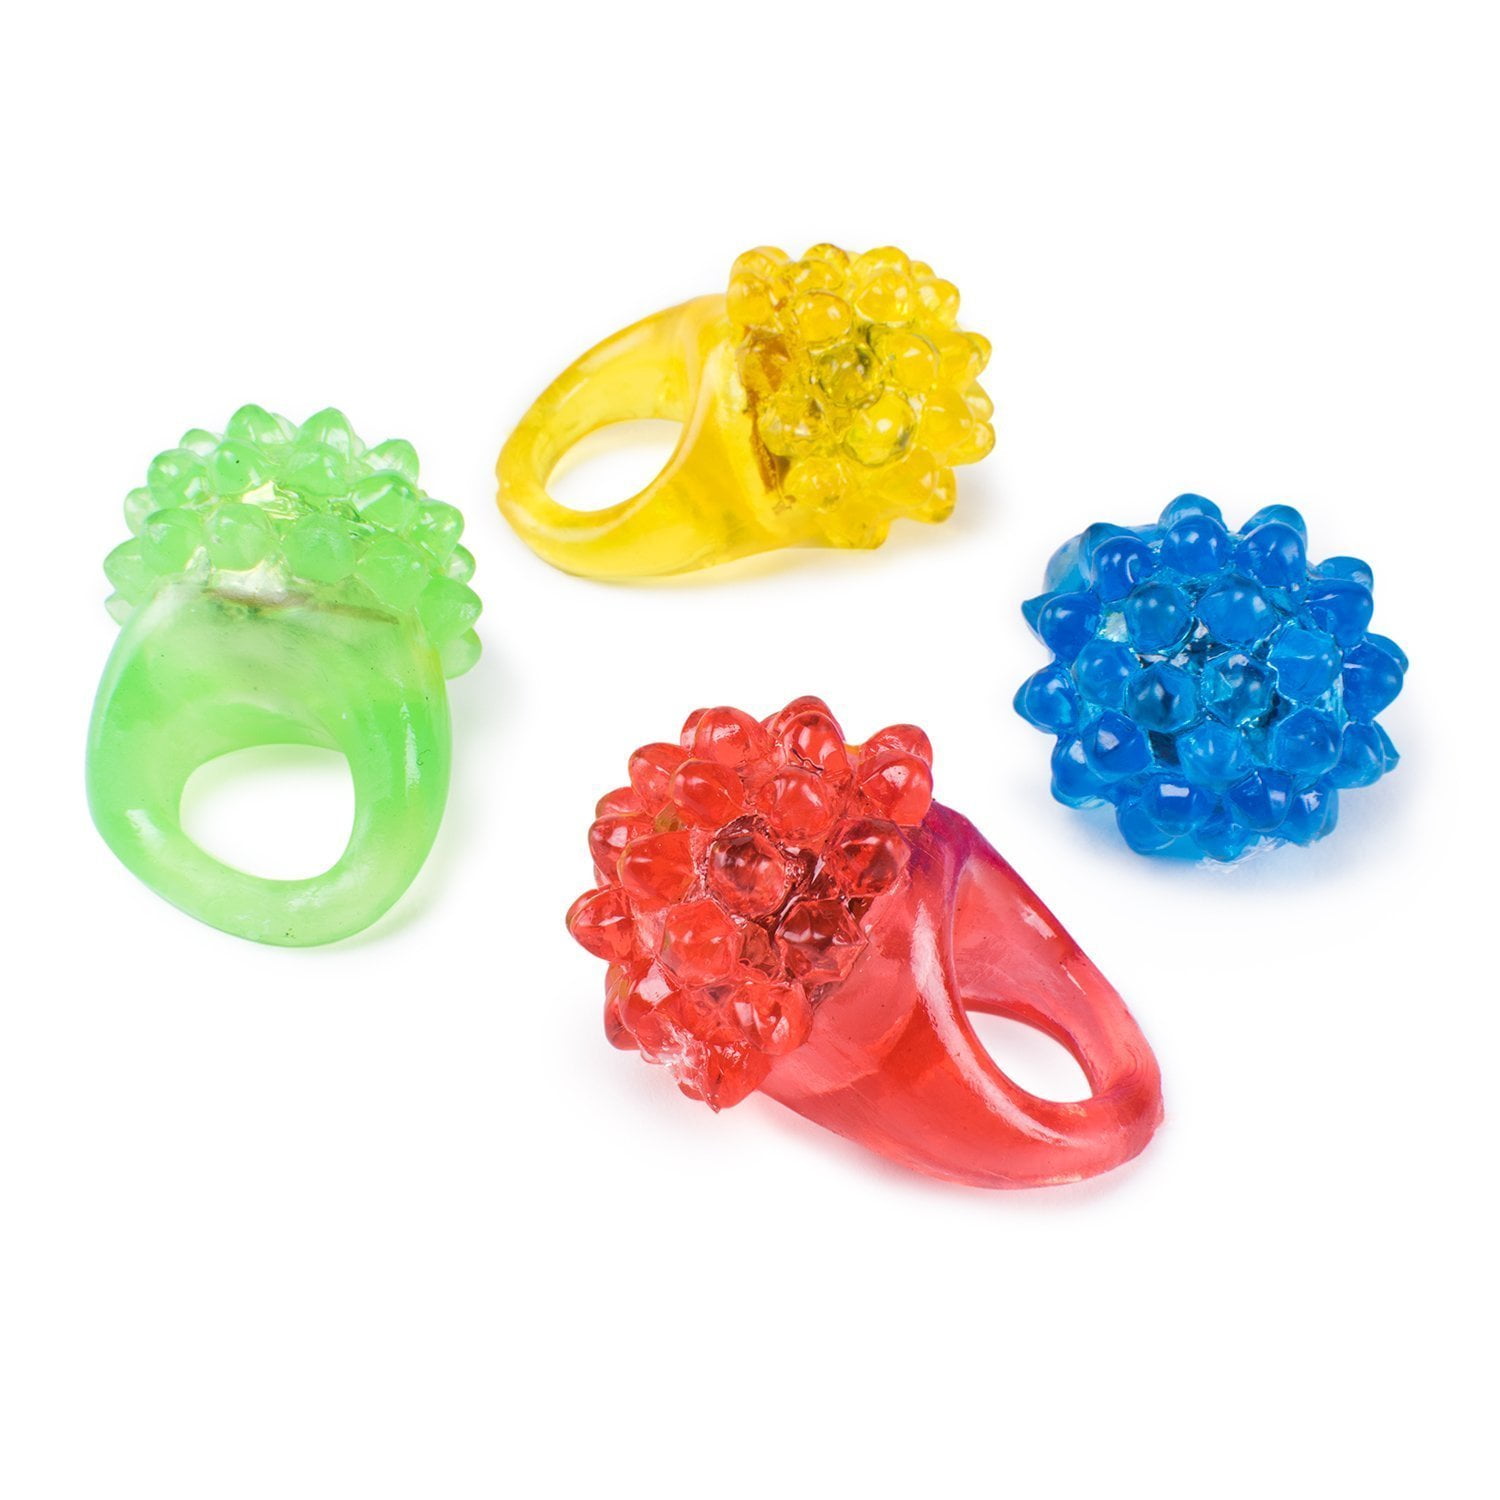 Random Color 18 Pack E-SCENERY Colorful Flashing Led Bumpy Rubber Jelly Rings for Party Favors Light Up Finger Toy for Kids Adults 